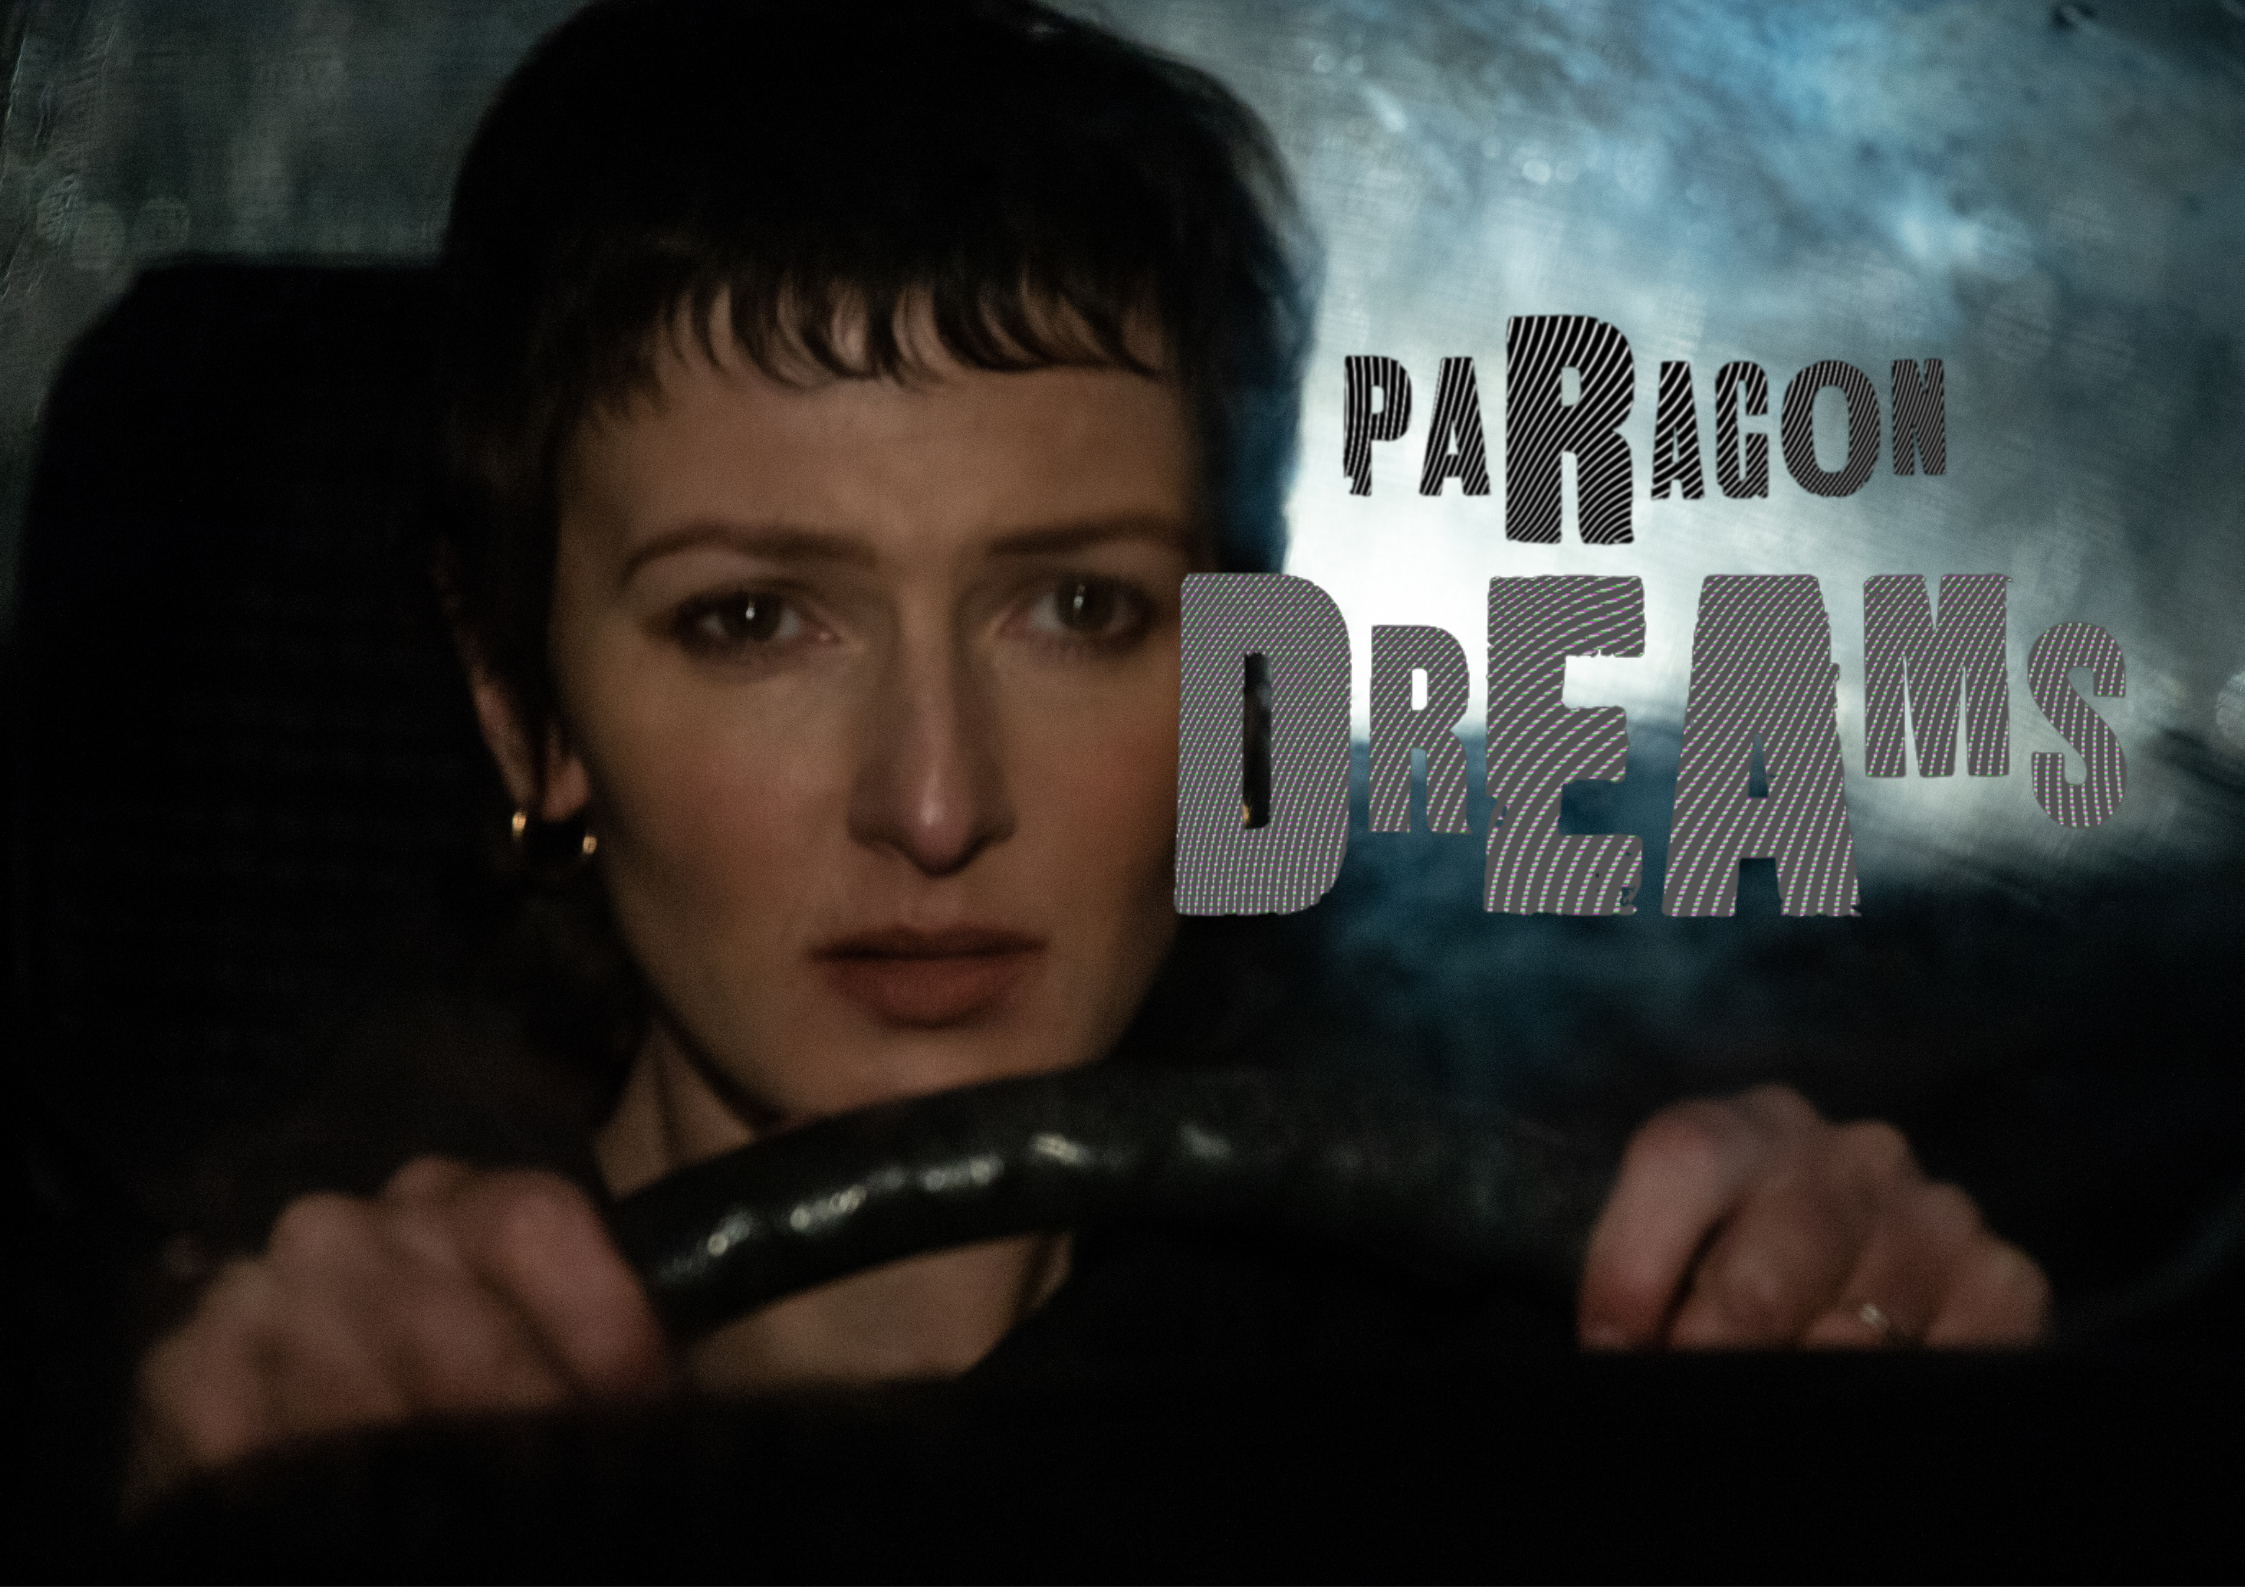  Paragon Dreams for the Auckland Writers Festival, Sabin Holloway 2022 